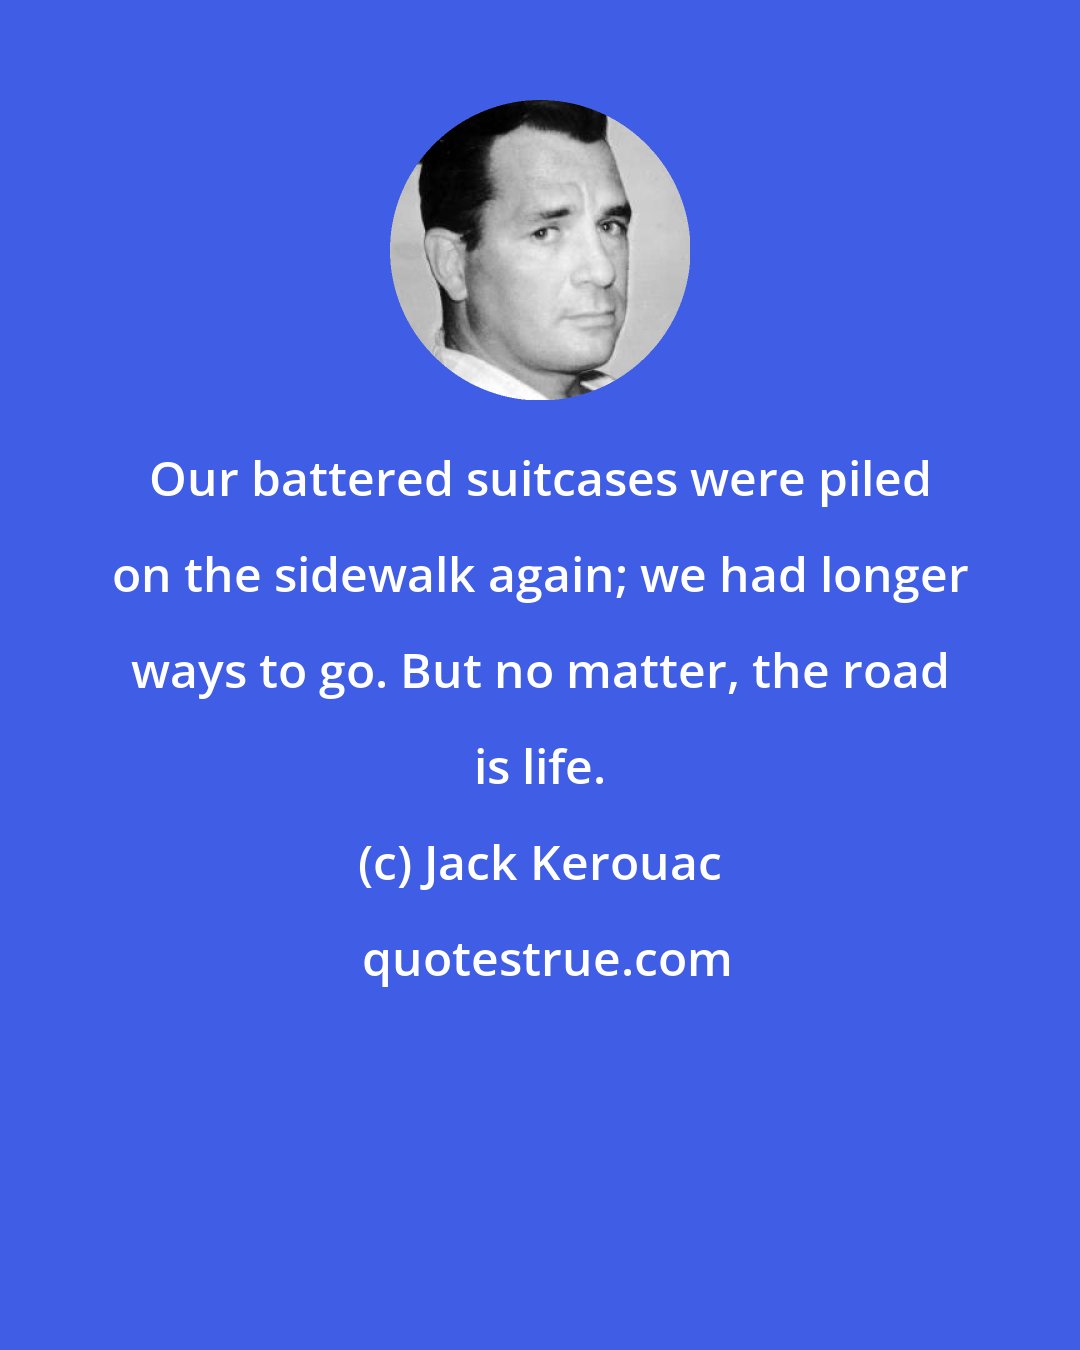 Jack Kerouac: Our battered suitcases were piled on the sidewalk again; we had longer ways to go. But no matter, the road is life.